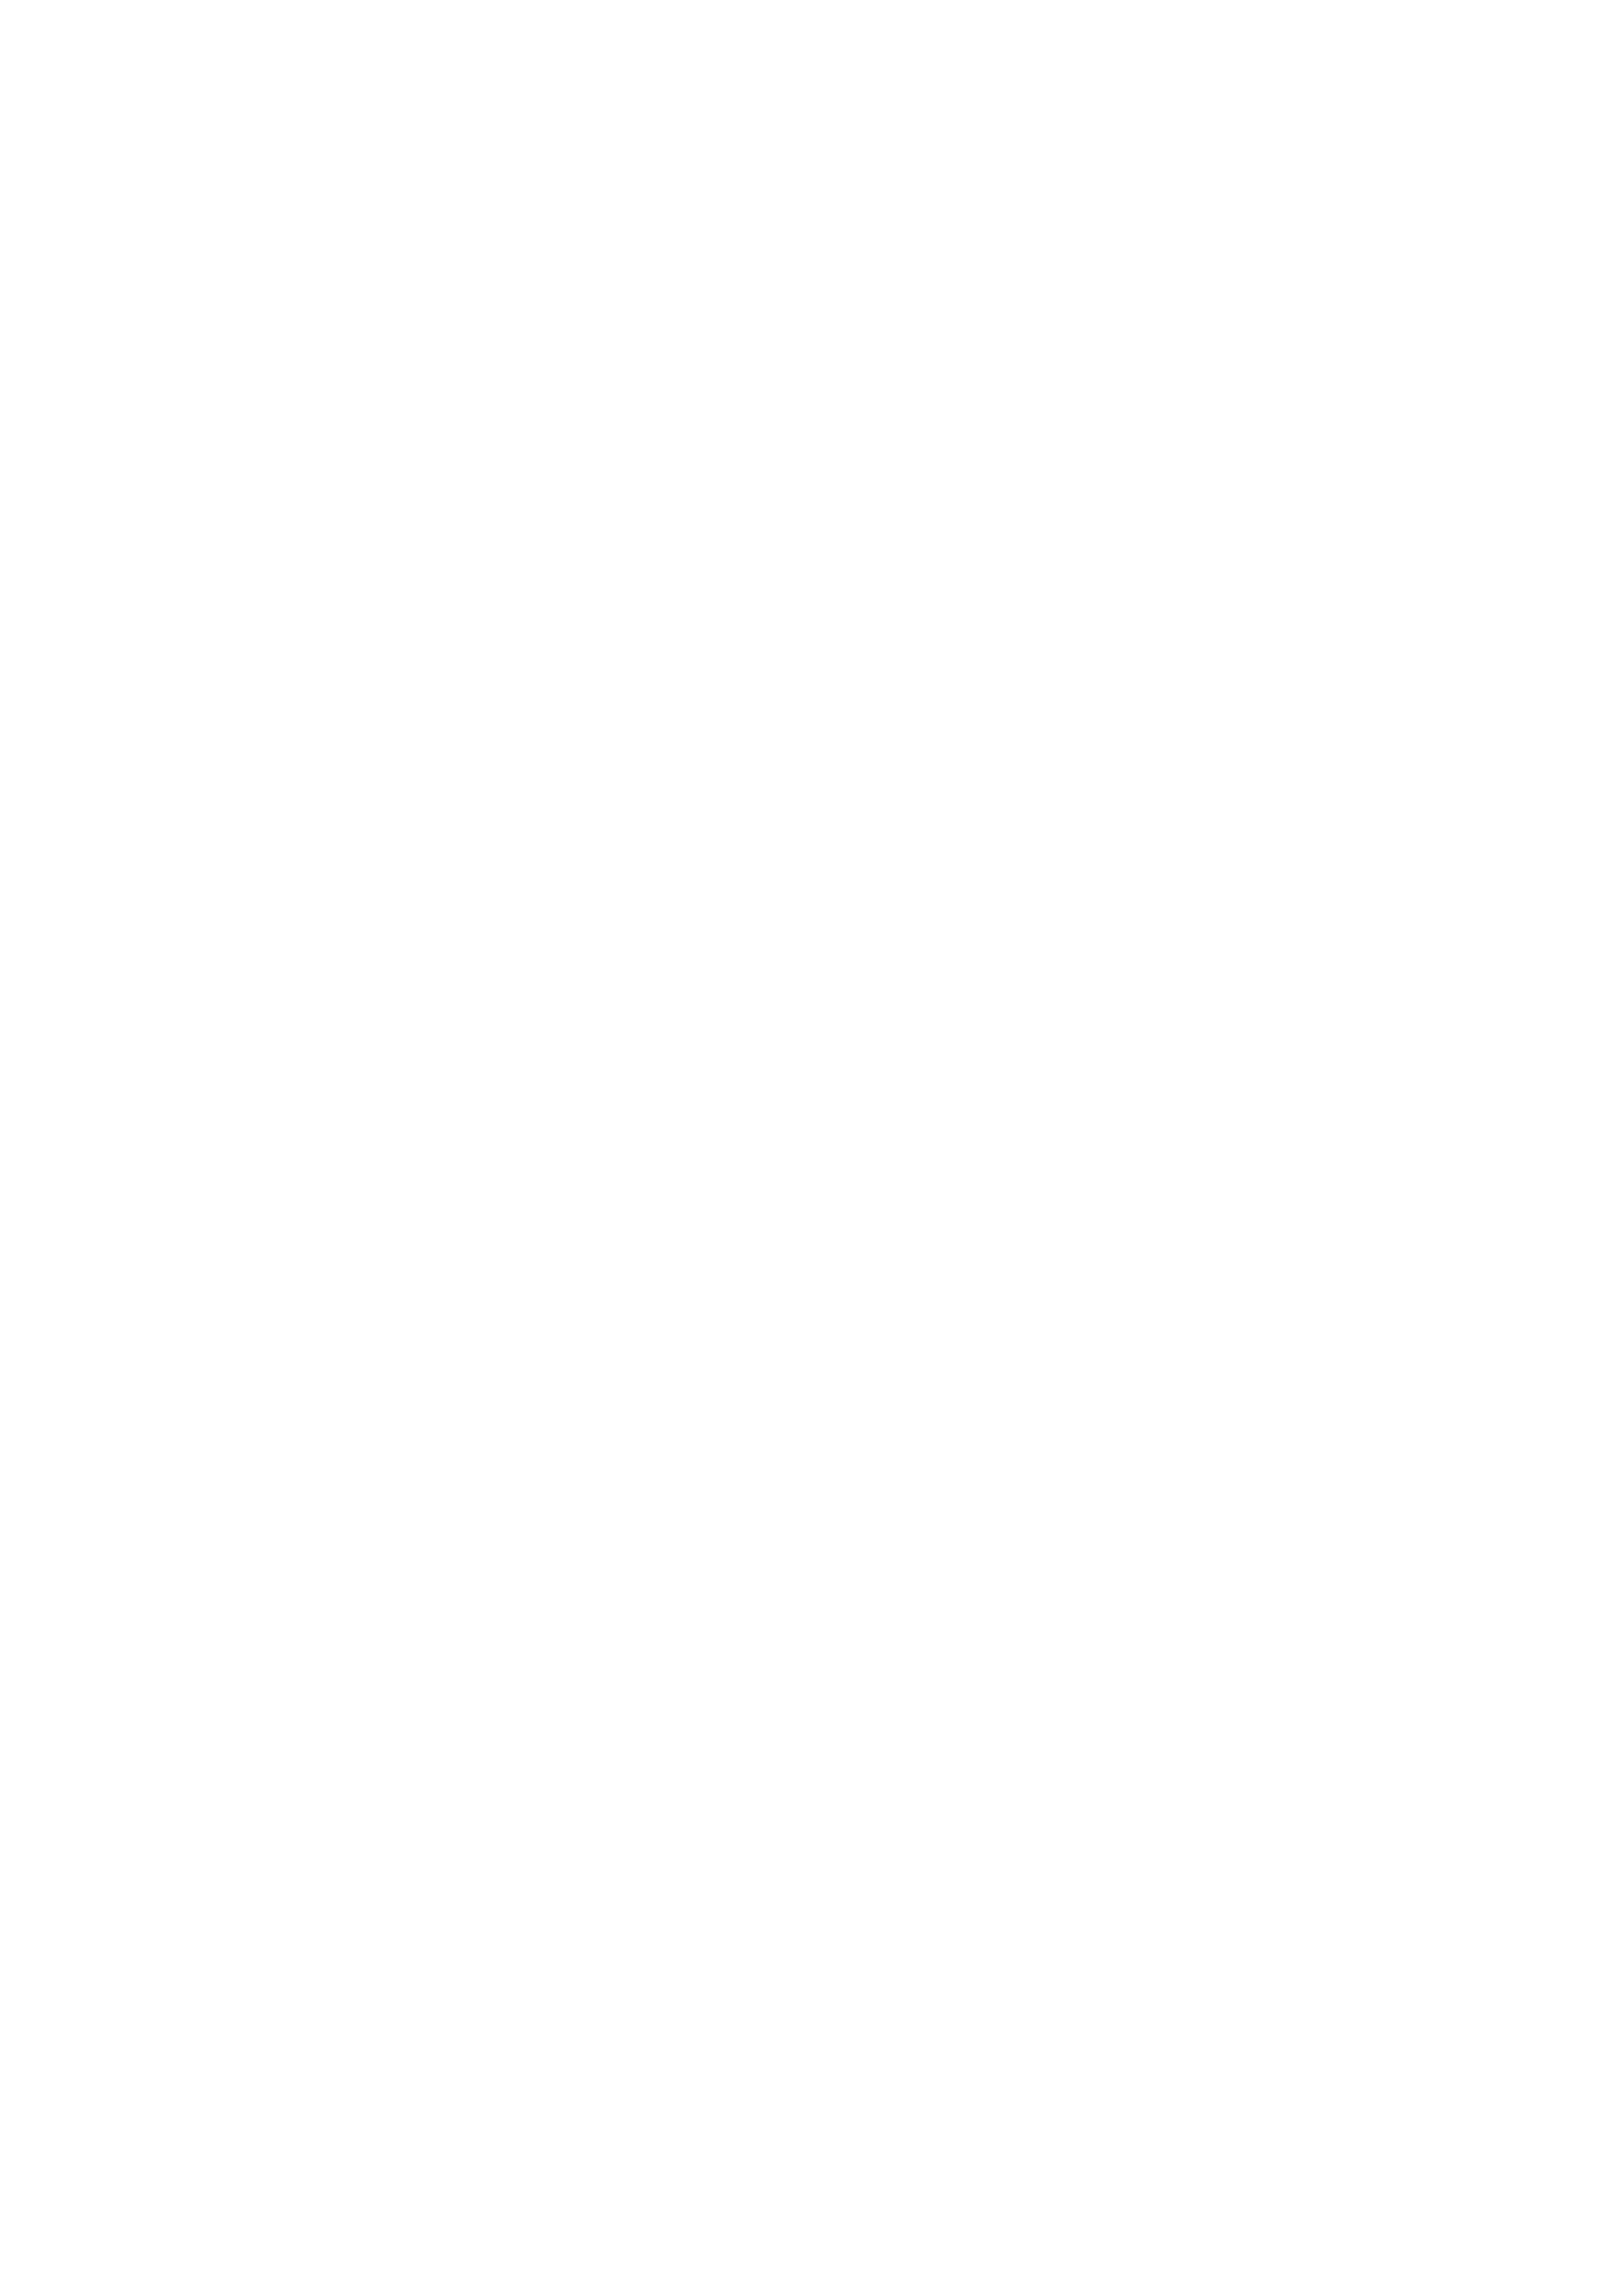 Board Of Secondary Education